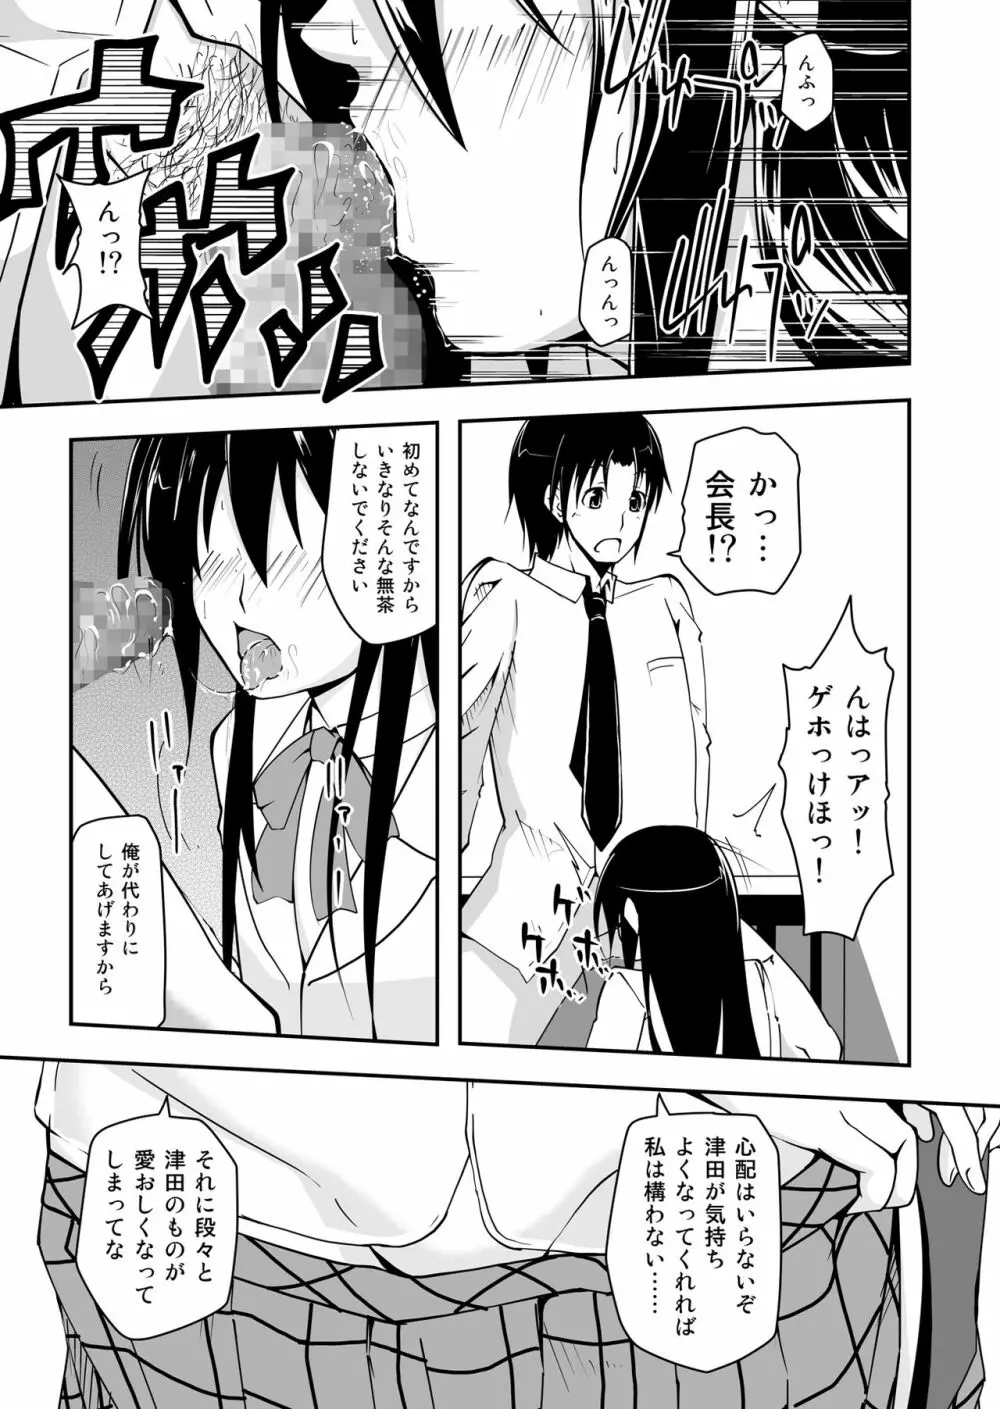 ＊＊＊＊＊＊＊＊＊! 1 Page.11